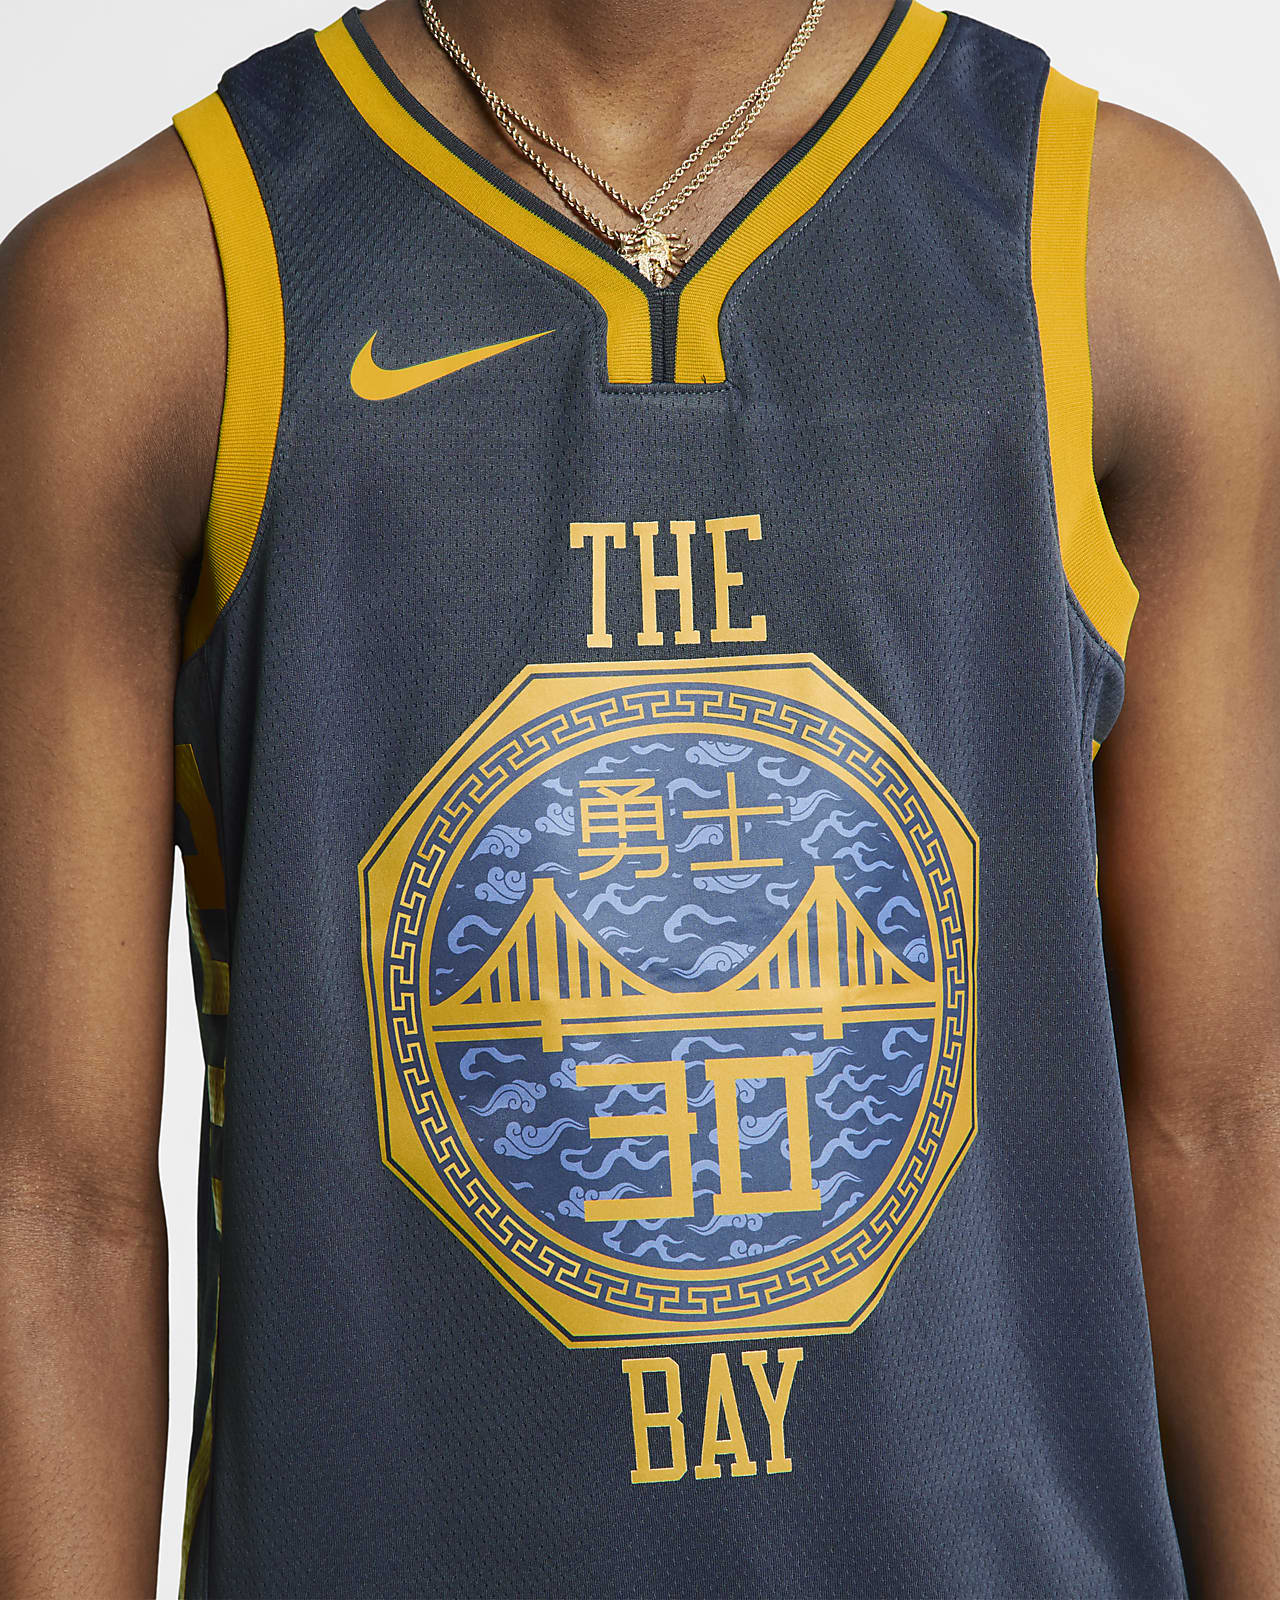 golden state jersey city edition